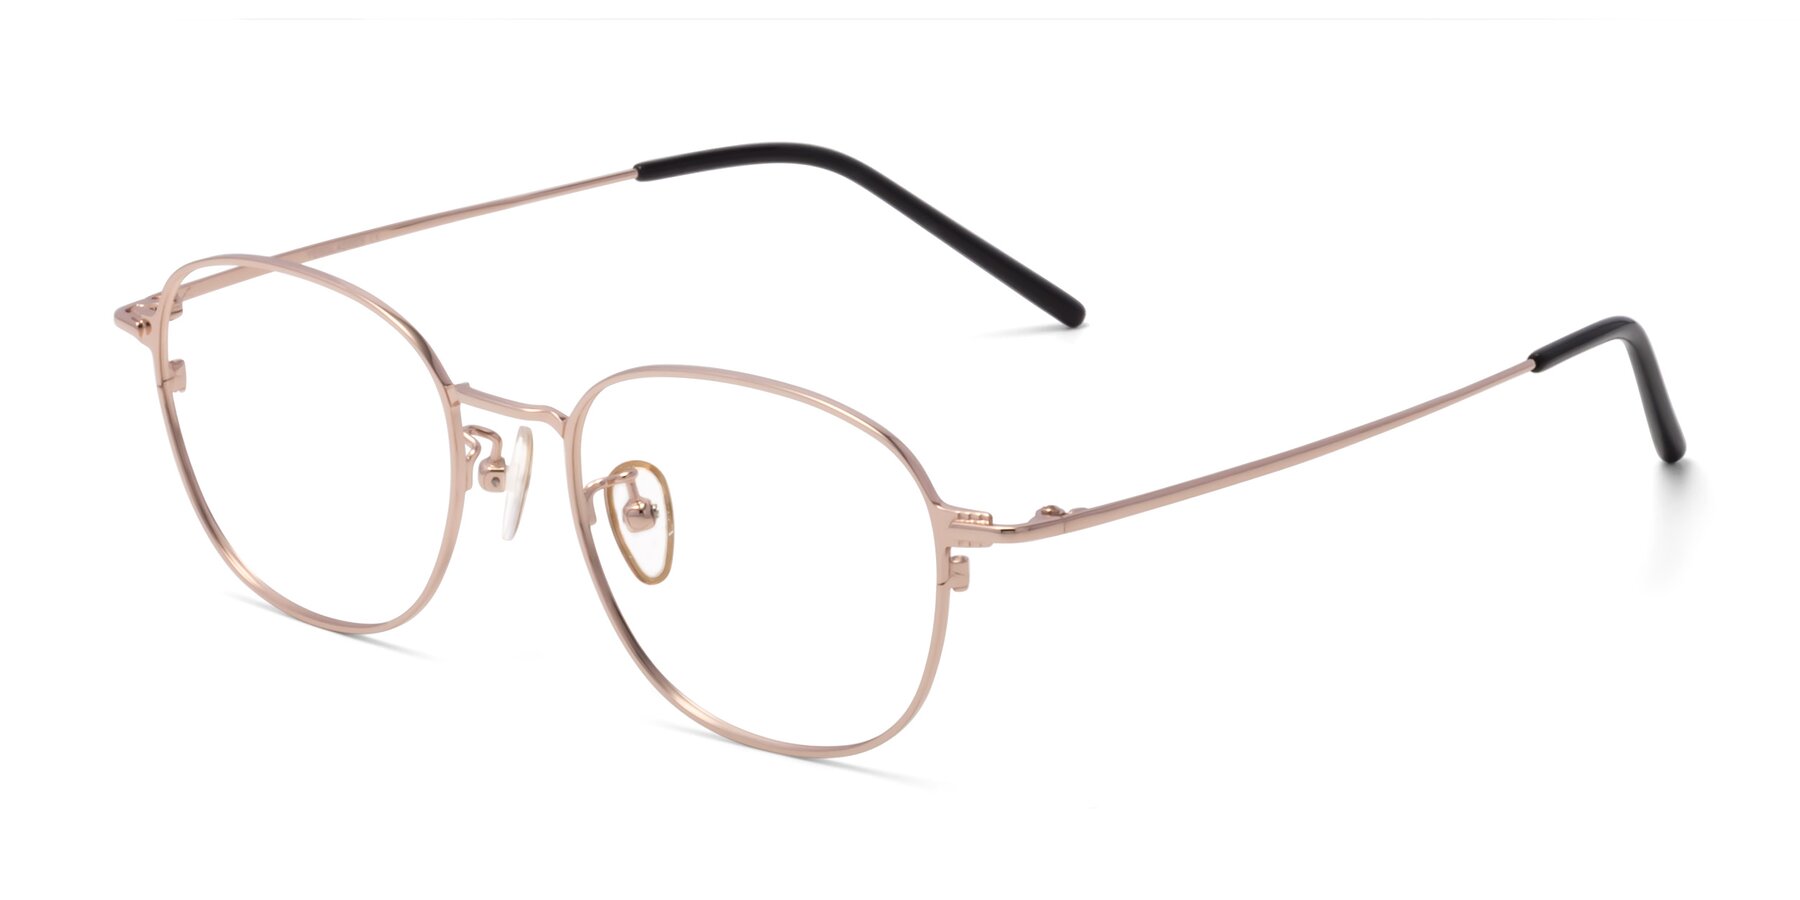 Angle of 18008 in Rose Gold with Clear Eyeglass Lenses